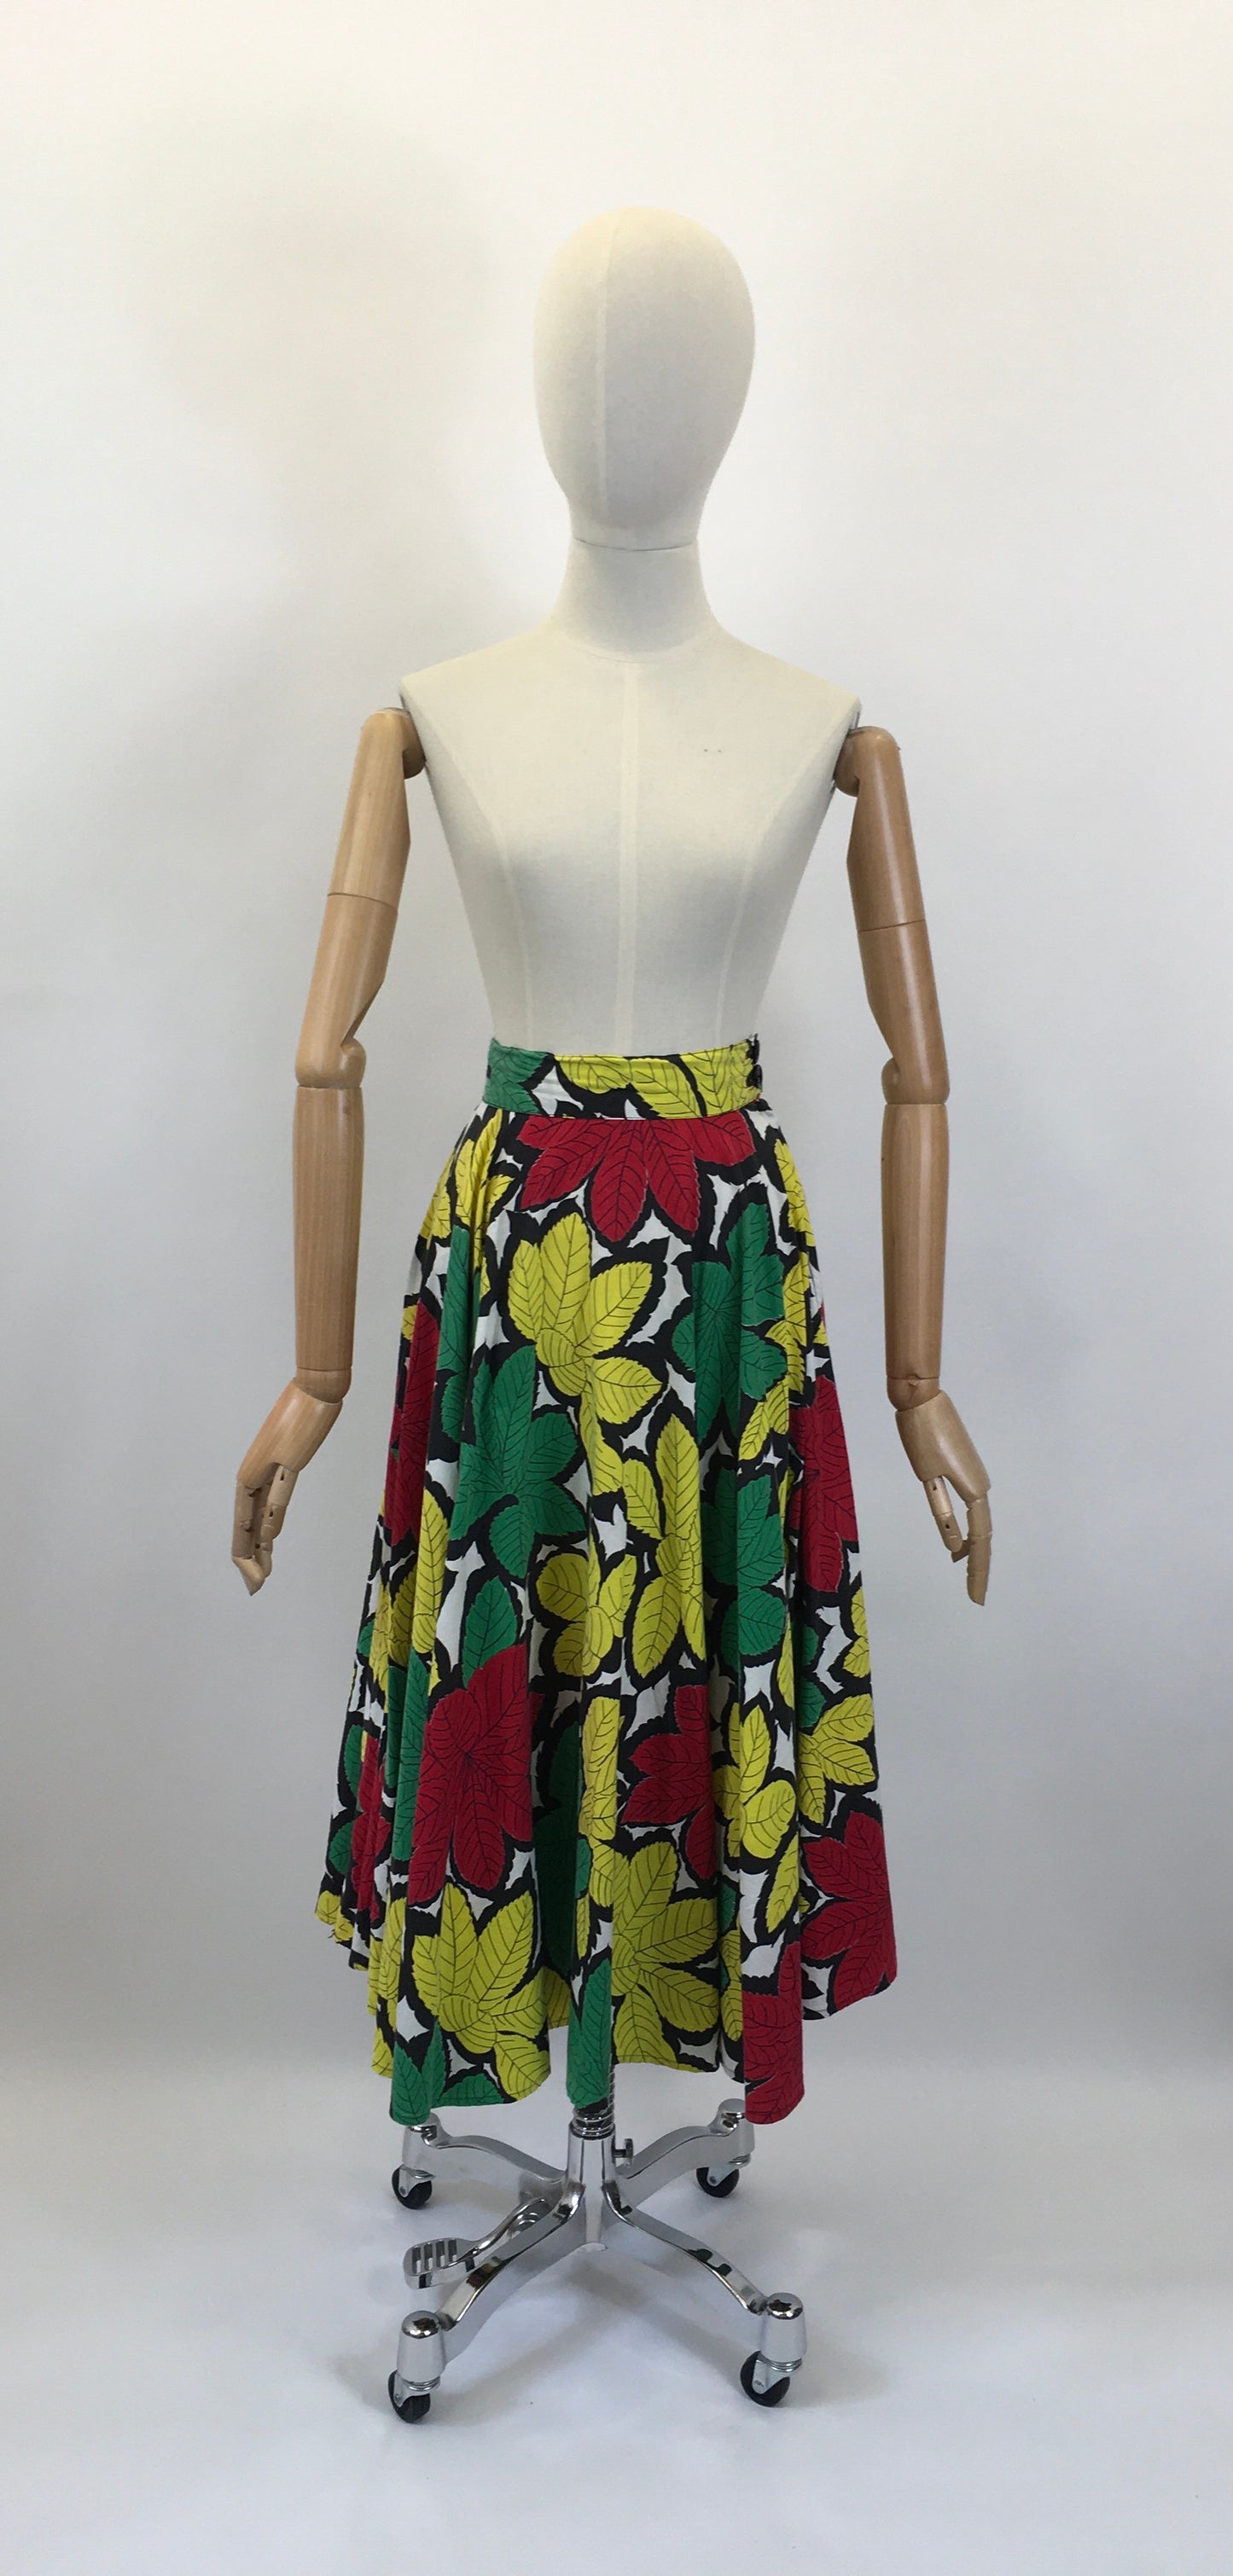 Original 1940's Sensational Cotton Summer Skirt - In a Black Edged Leaf Motif With Bright Red, Green, White & Yellow